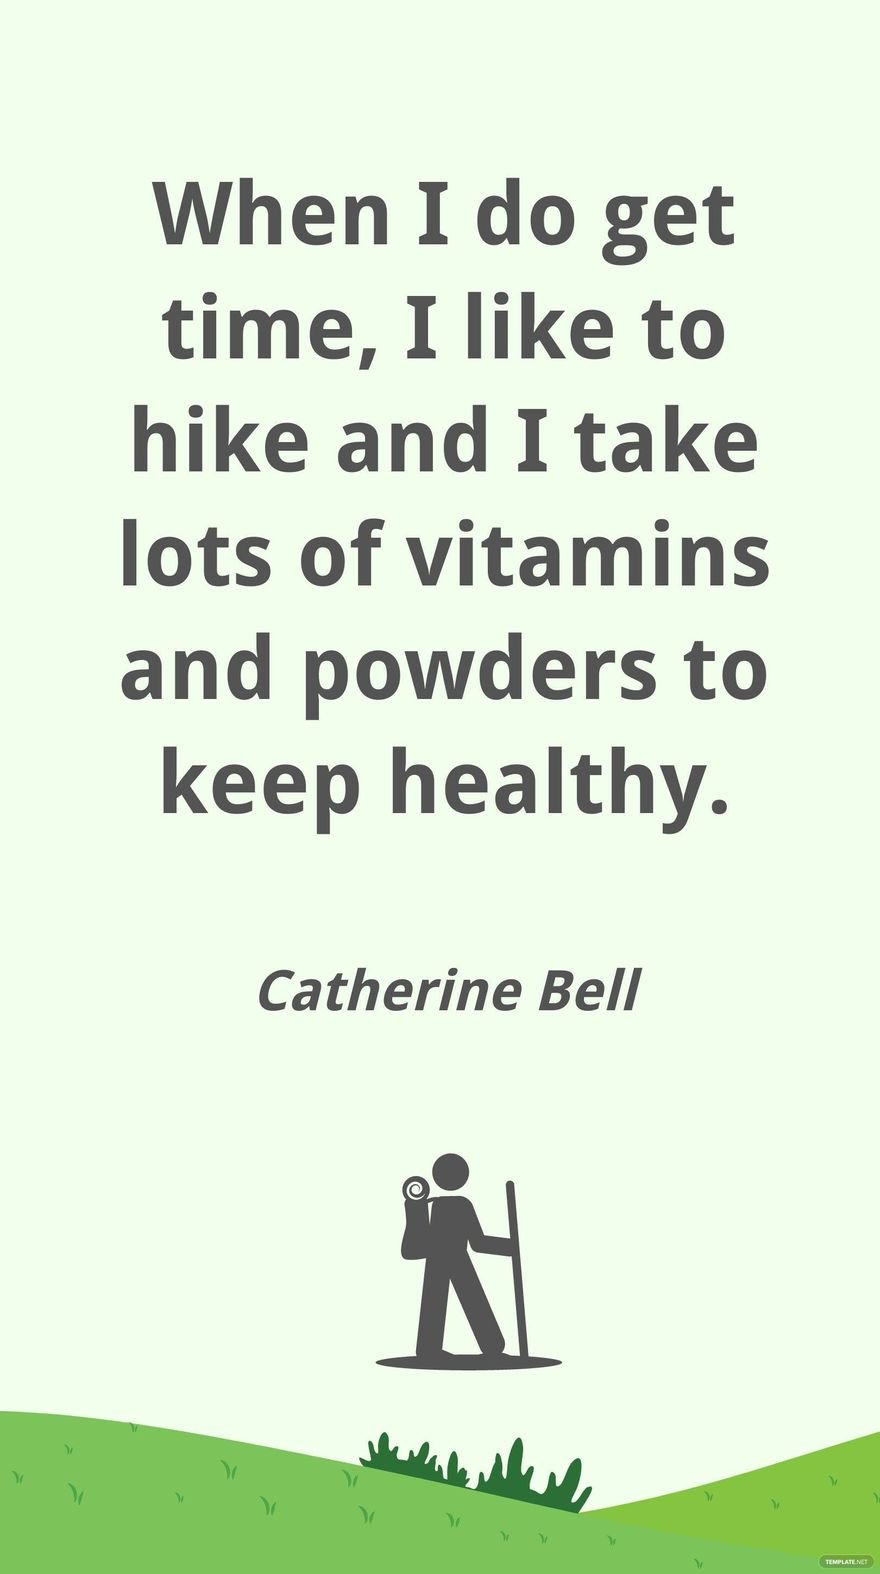 Catherine Bell - When I do get time, I like to hike and I take lots of vitamins and powders to keep healthy. in JPG